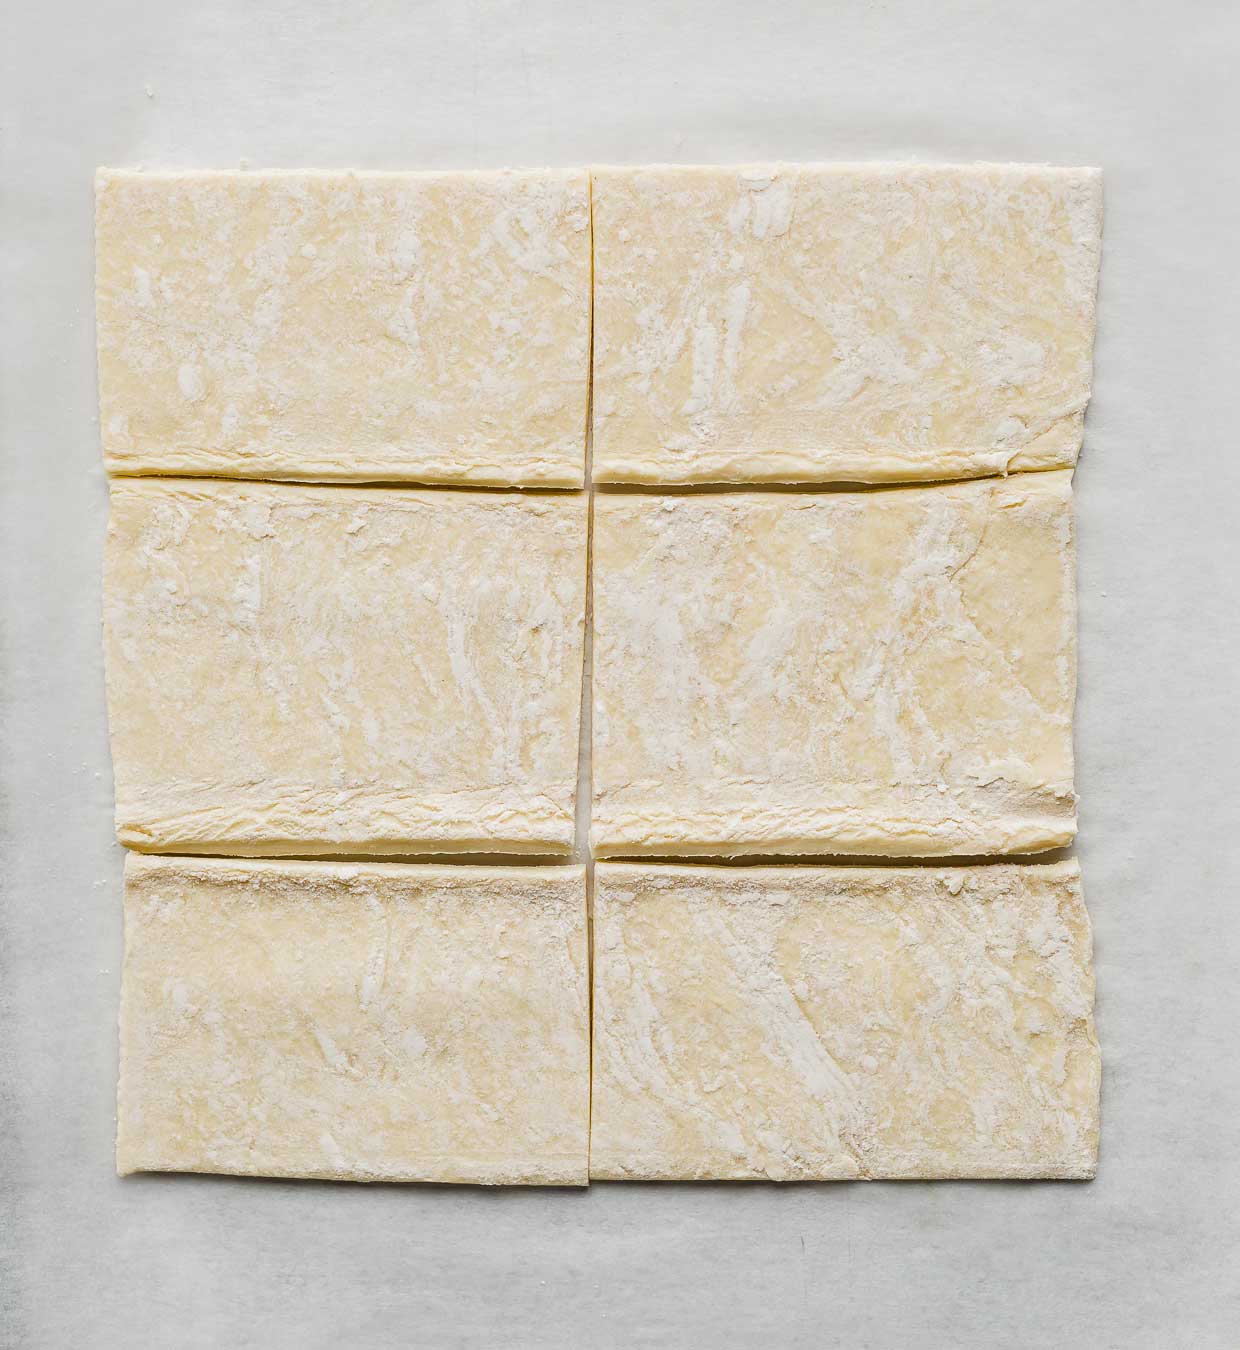 A puff pastry sheet cut into six rectangles, used to make a berry toaster strudel at home.